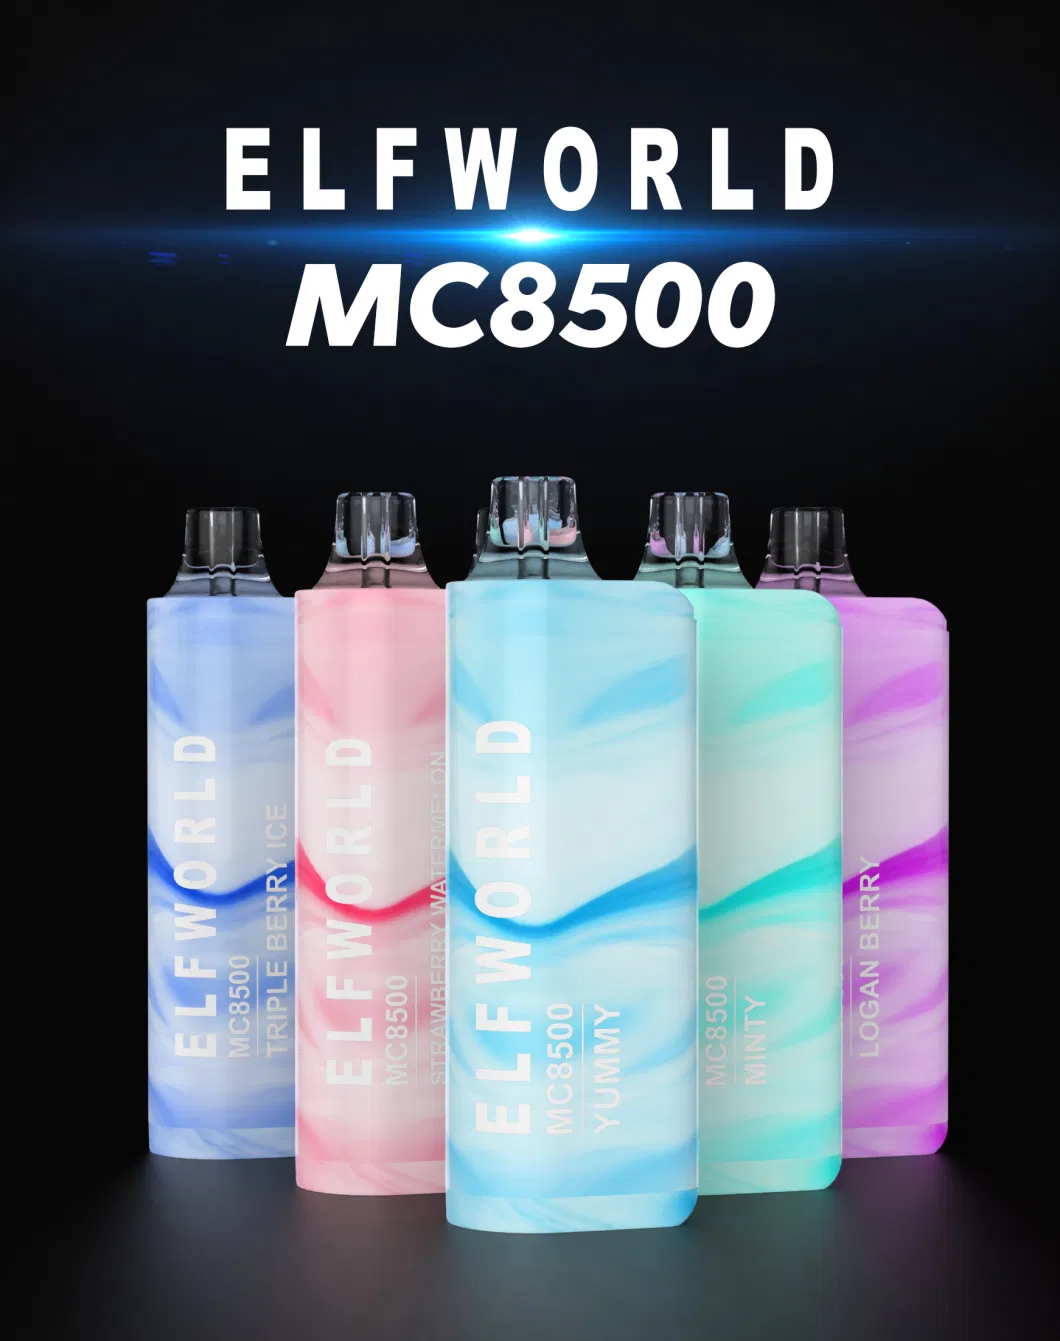 Factory Directly Wholesale Mesh Coil High Quality Elfworld De6000 Mc8500 Big Puffs Disposable in Stock Vape